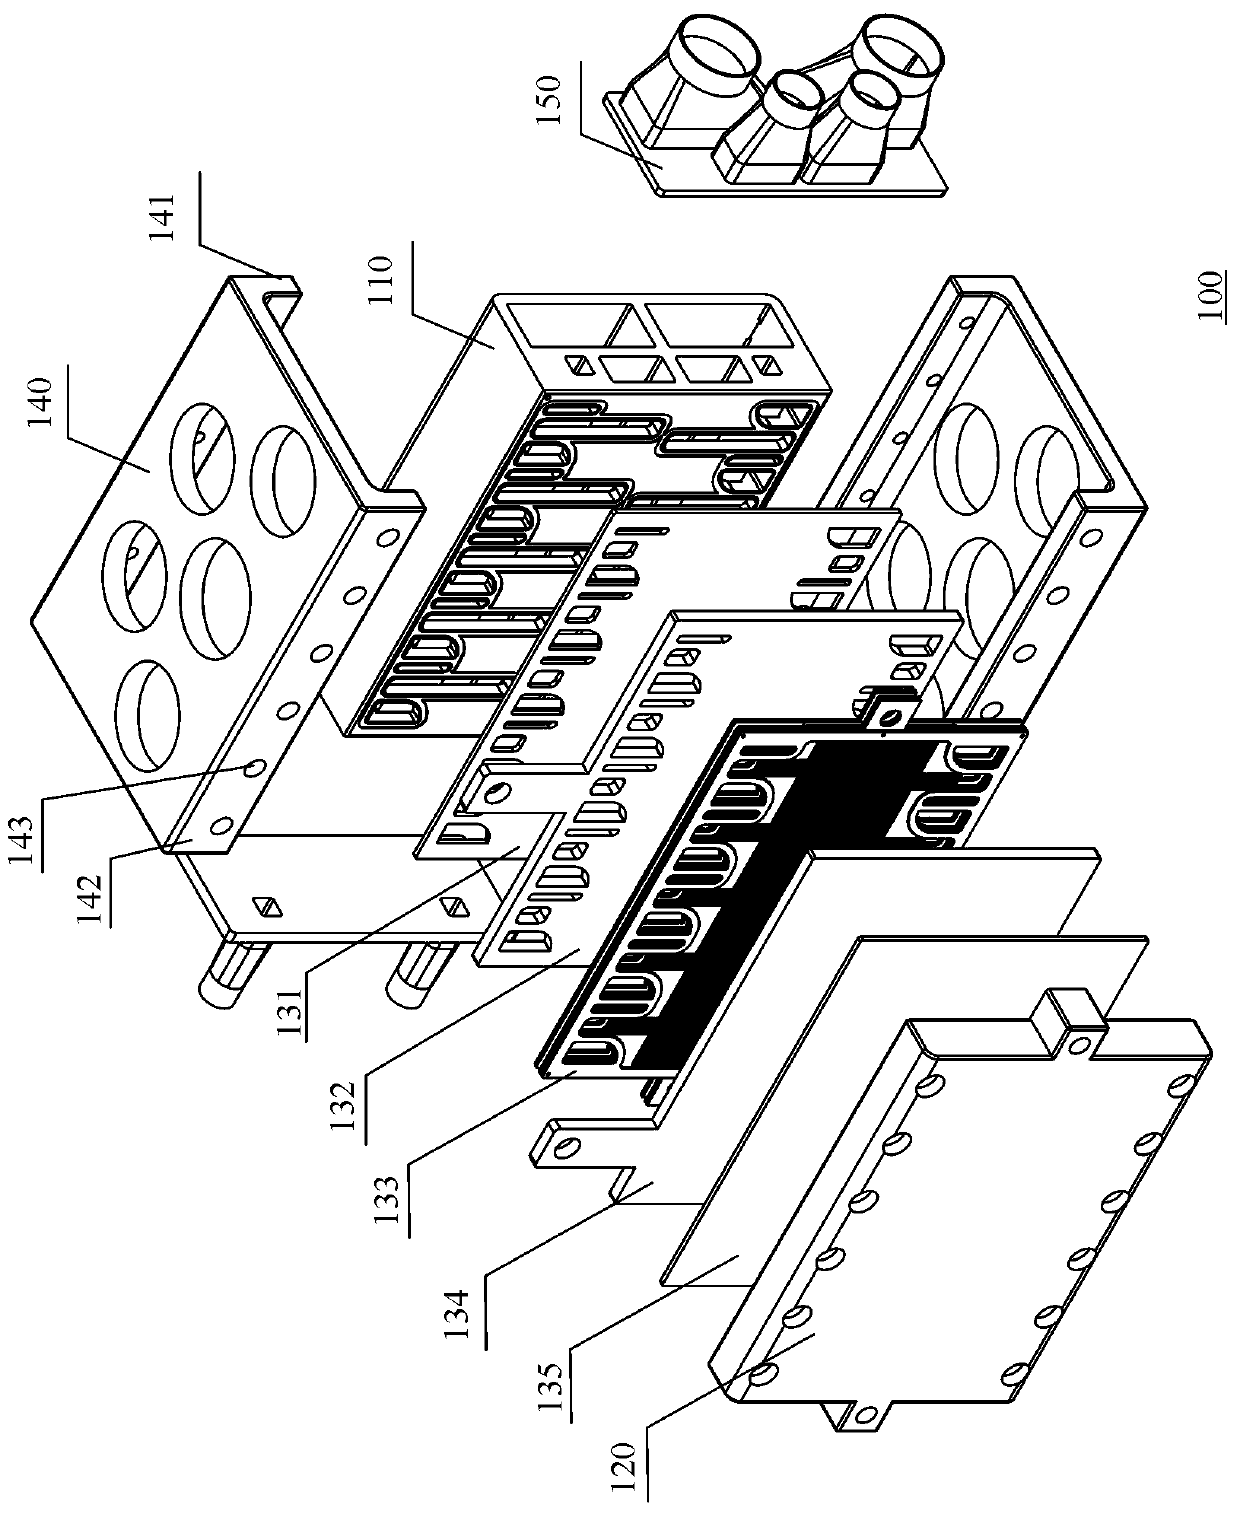 Fuel cells, and bipolar plates and bipolar plate assemblies for fuel cells